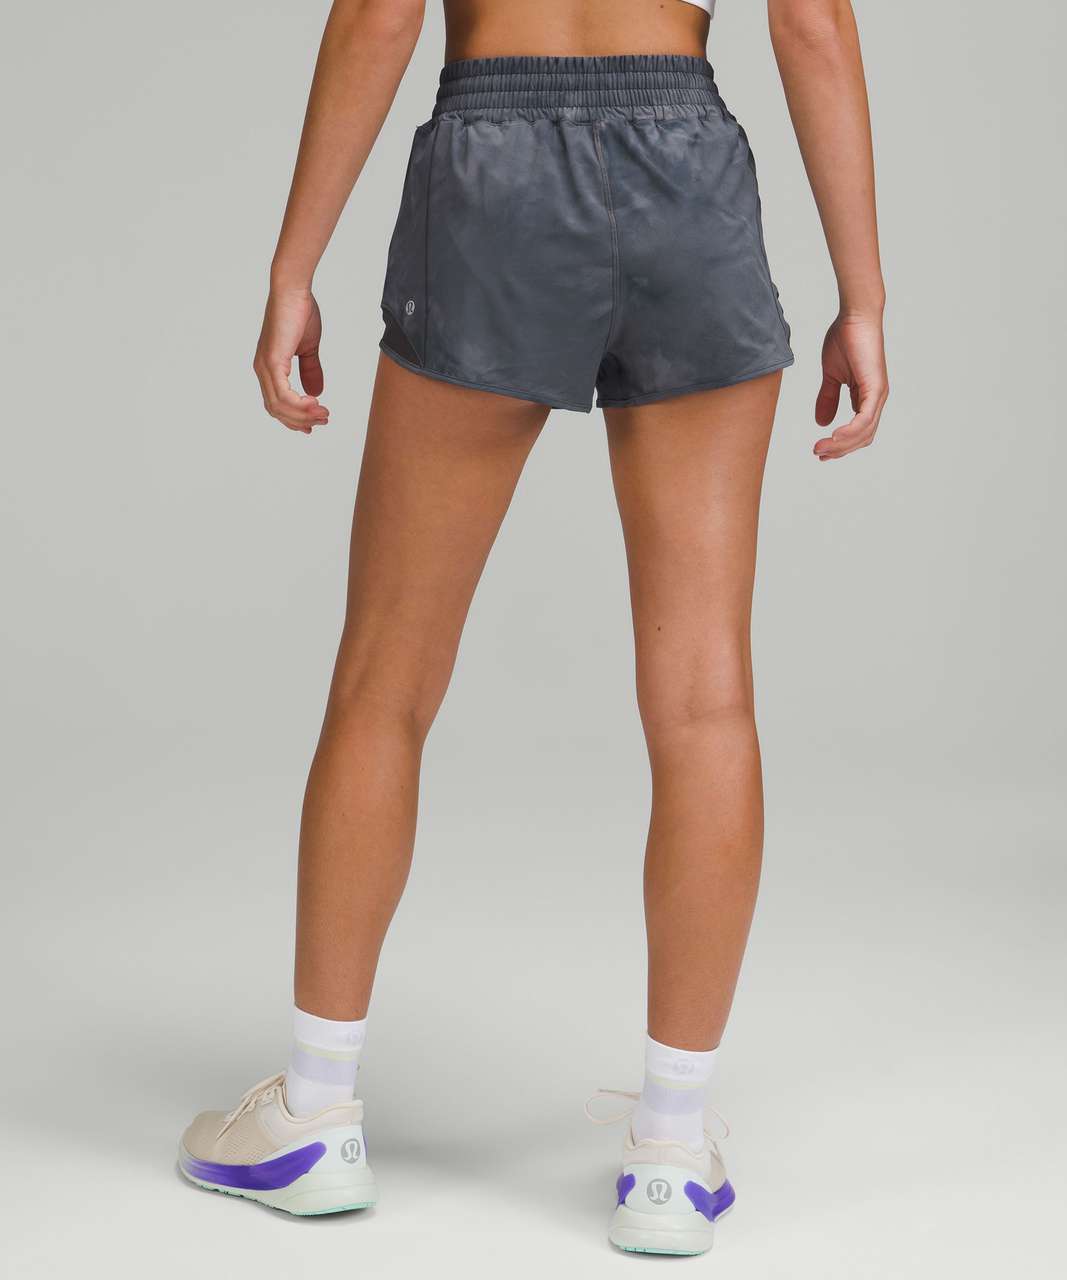 Lululemon Hotty Hot Shorts 2.5 Inch Gray Size 8 - $15 (77% Off Retail) -  From Jesse